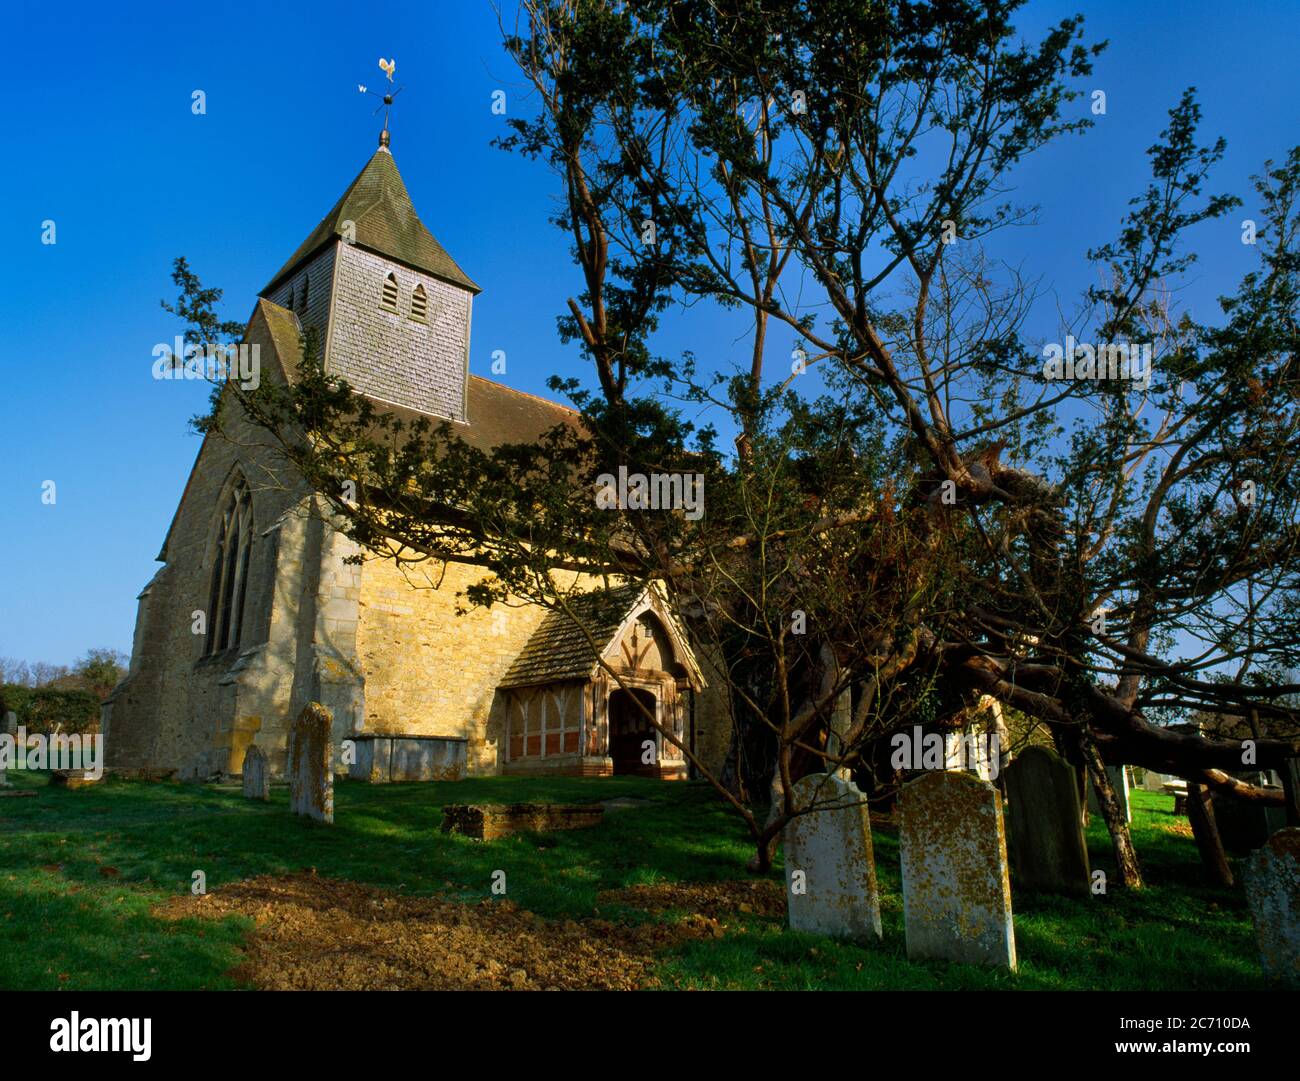 View NE of Dunsfold late C13th church, Surrey, England, UK, on an artificial mound beside an ancient yew tree. A Grade I Listed Building: 1270-90. Stock Photo